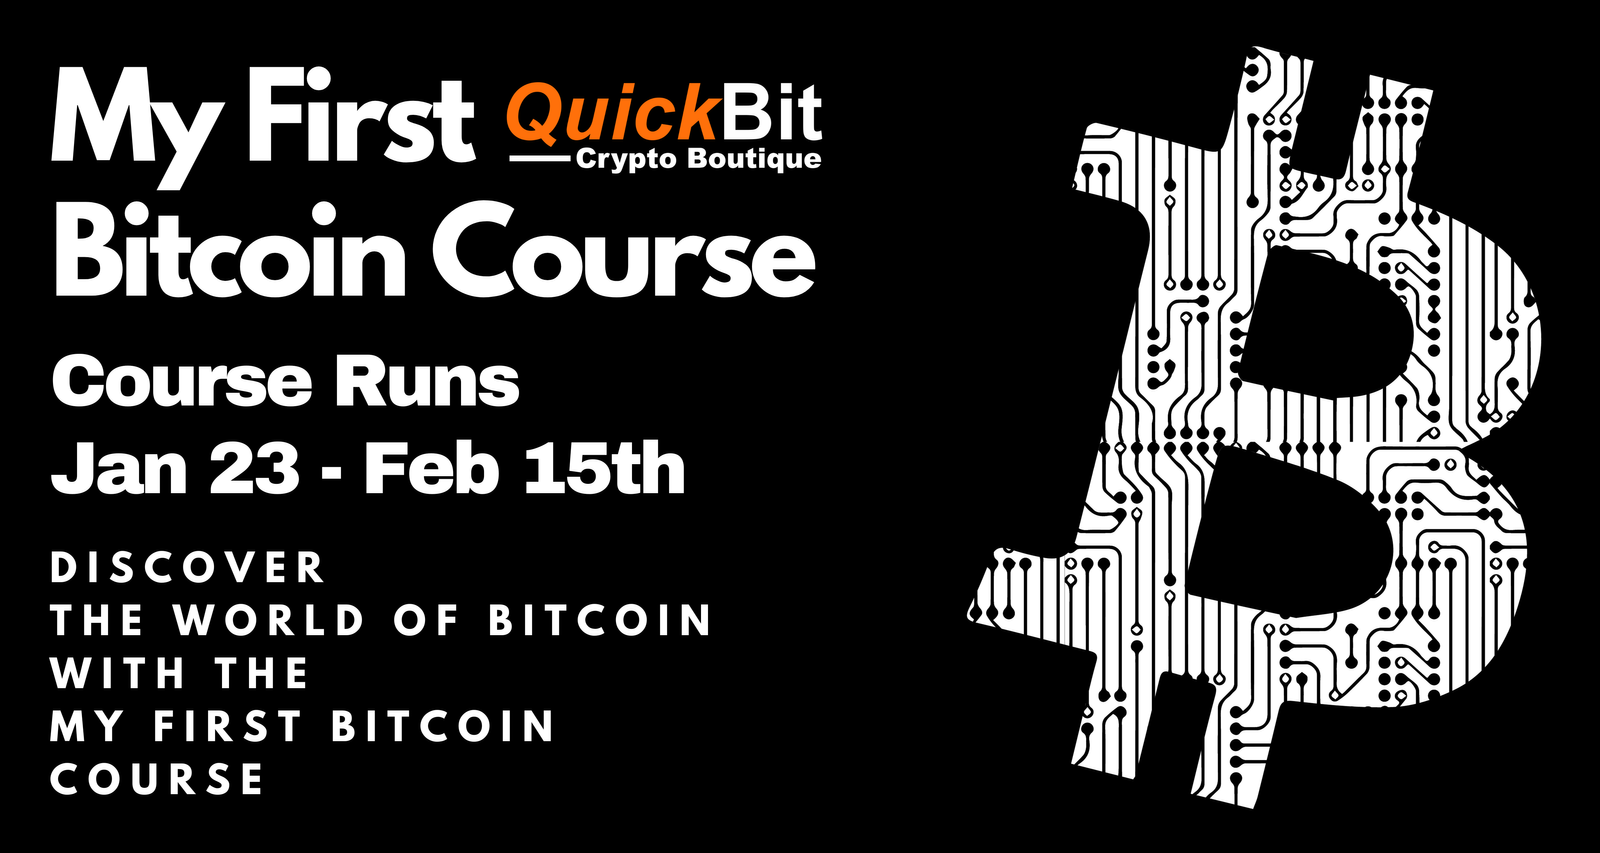 My First Bitcoin Course